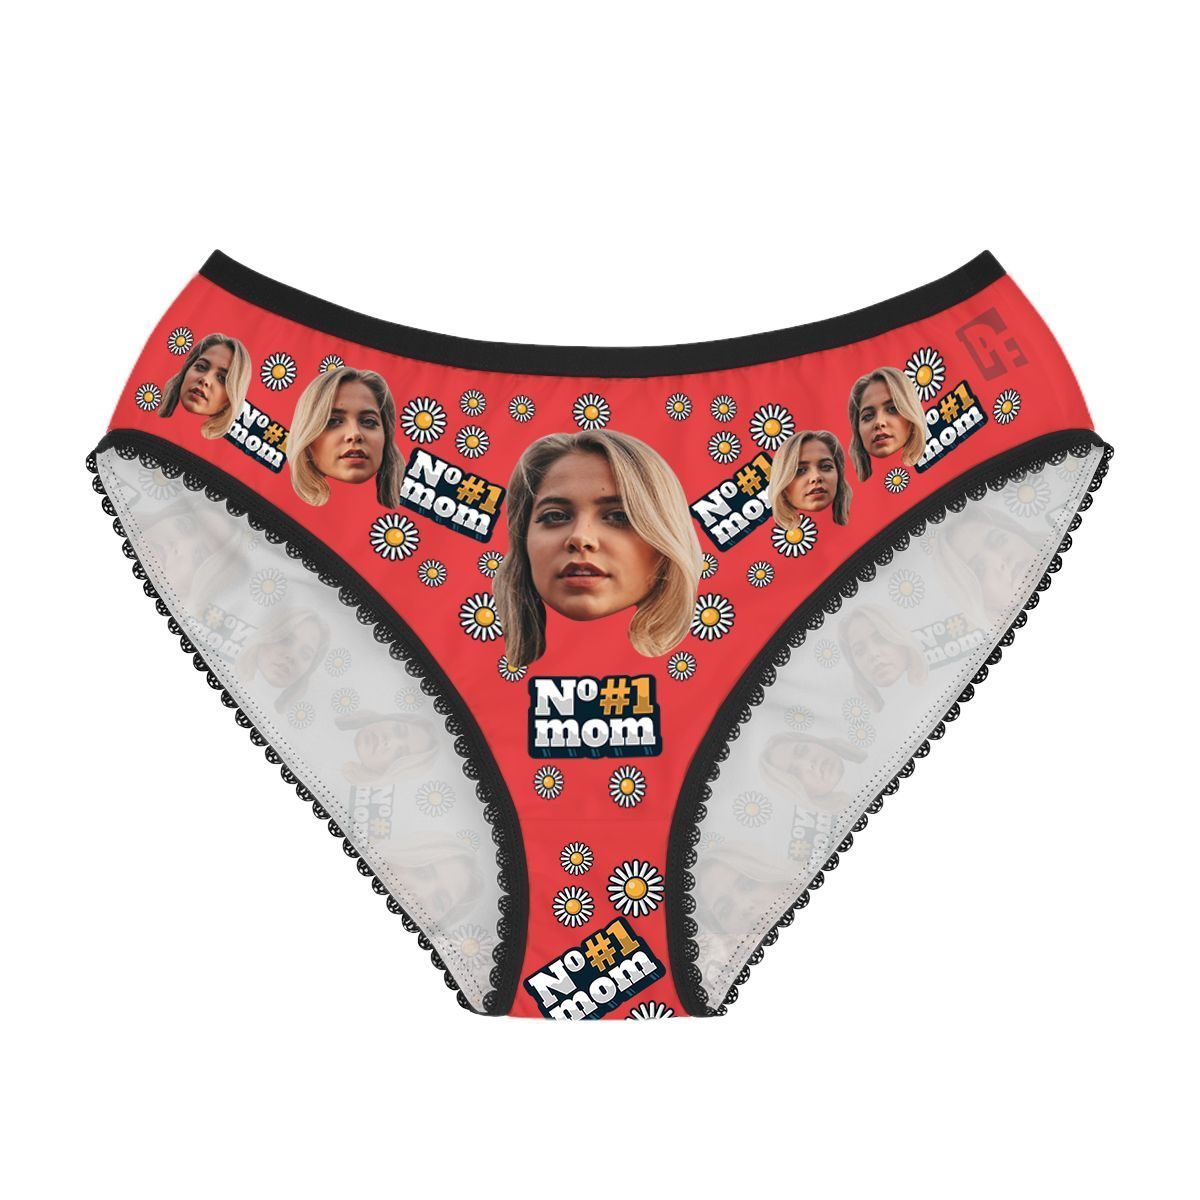 Red #1 Mom women's underwear briefs personalized with photo printed on them